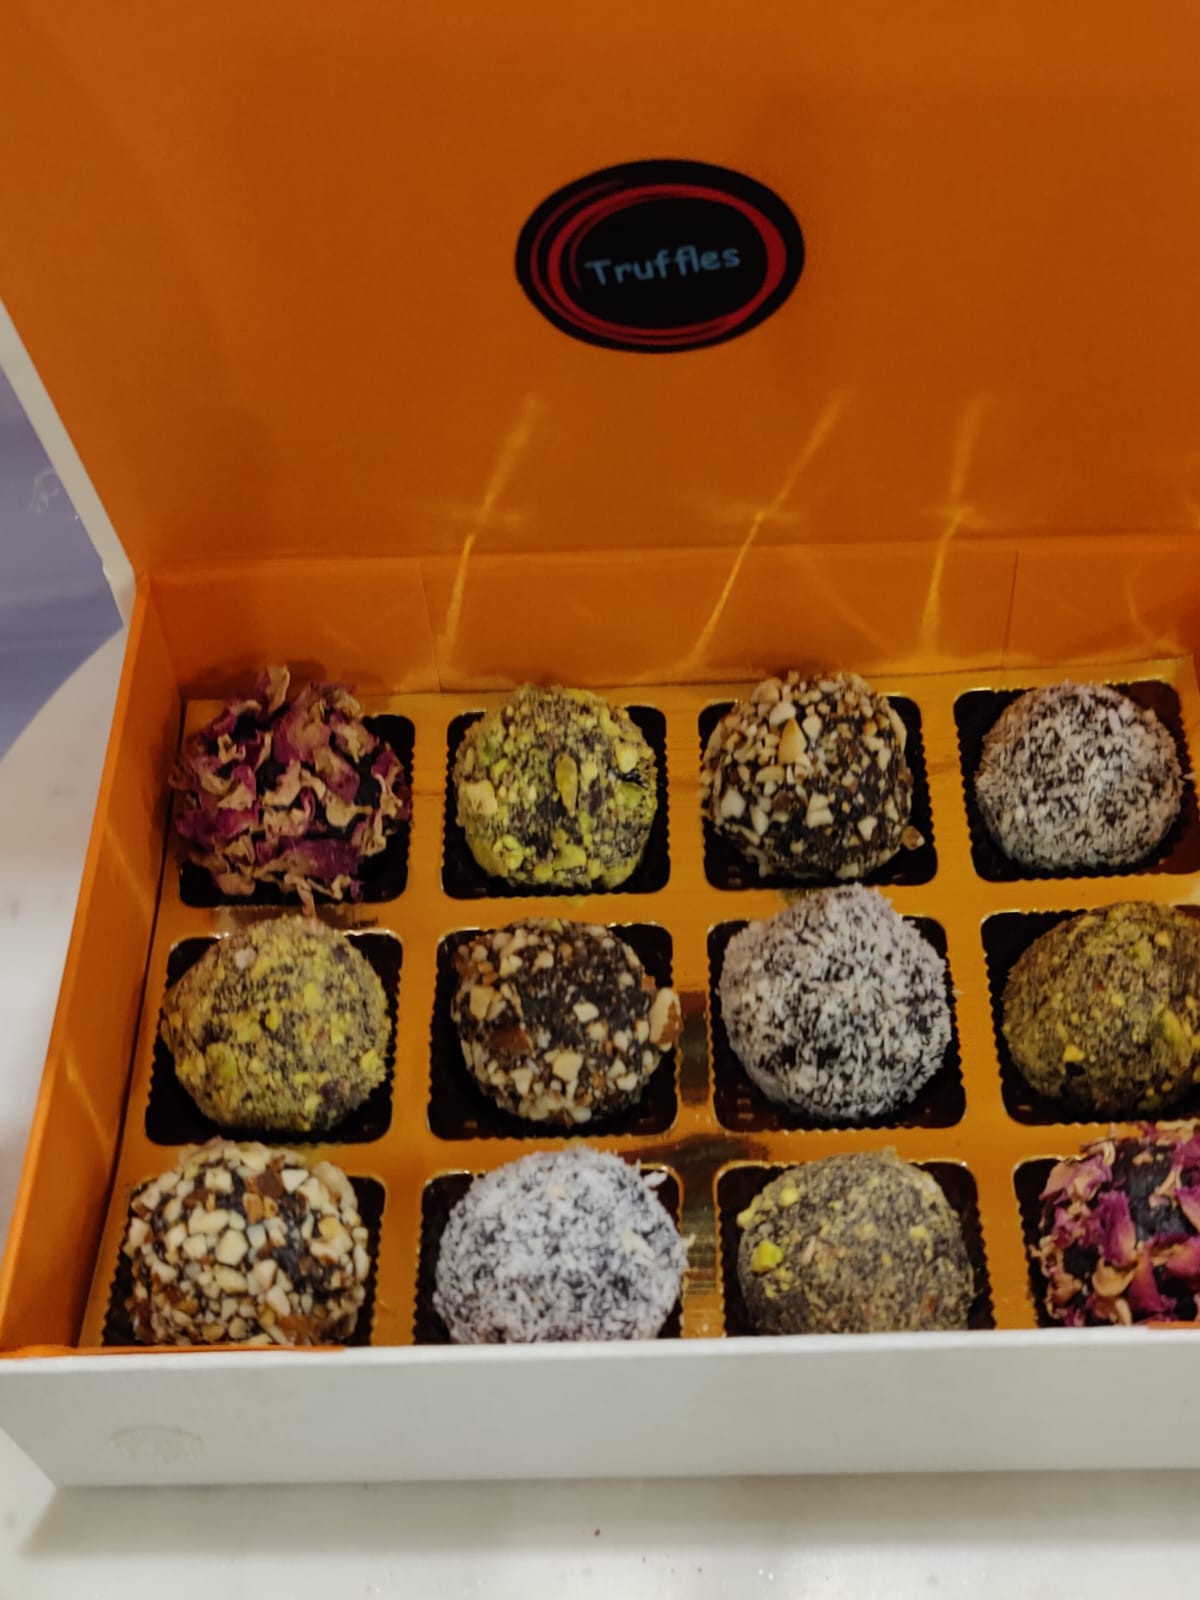 EXCLUSIVE TRUFFLES COLLECTION